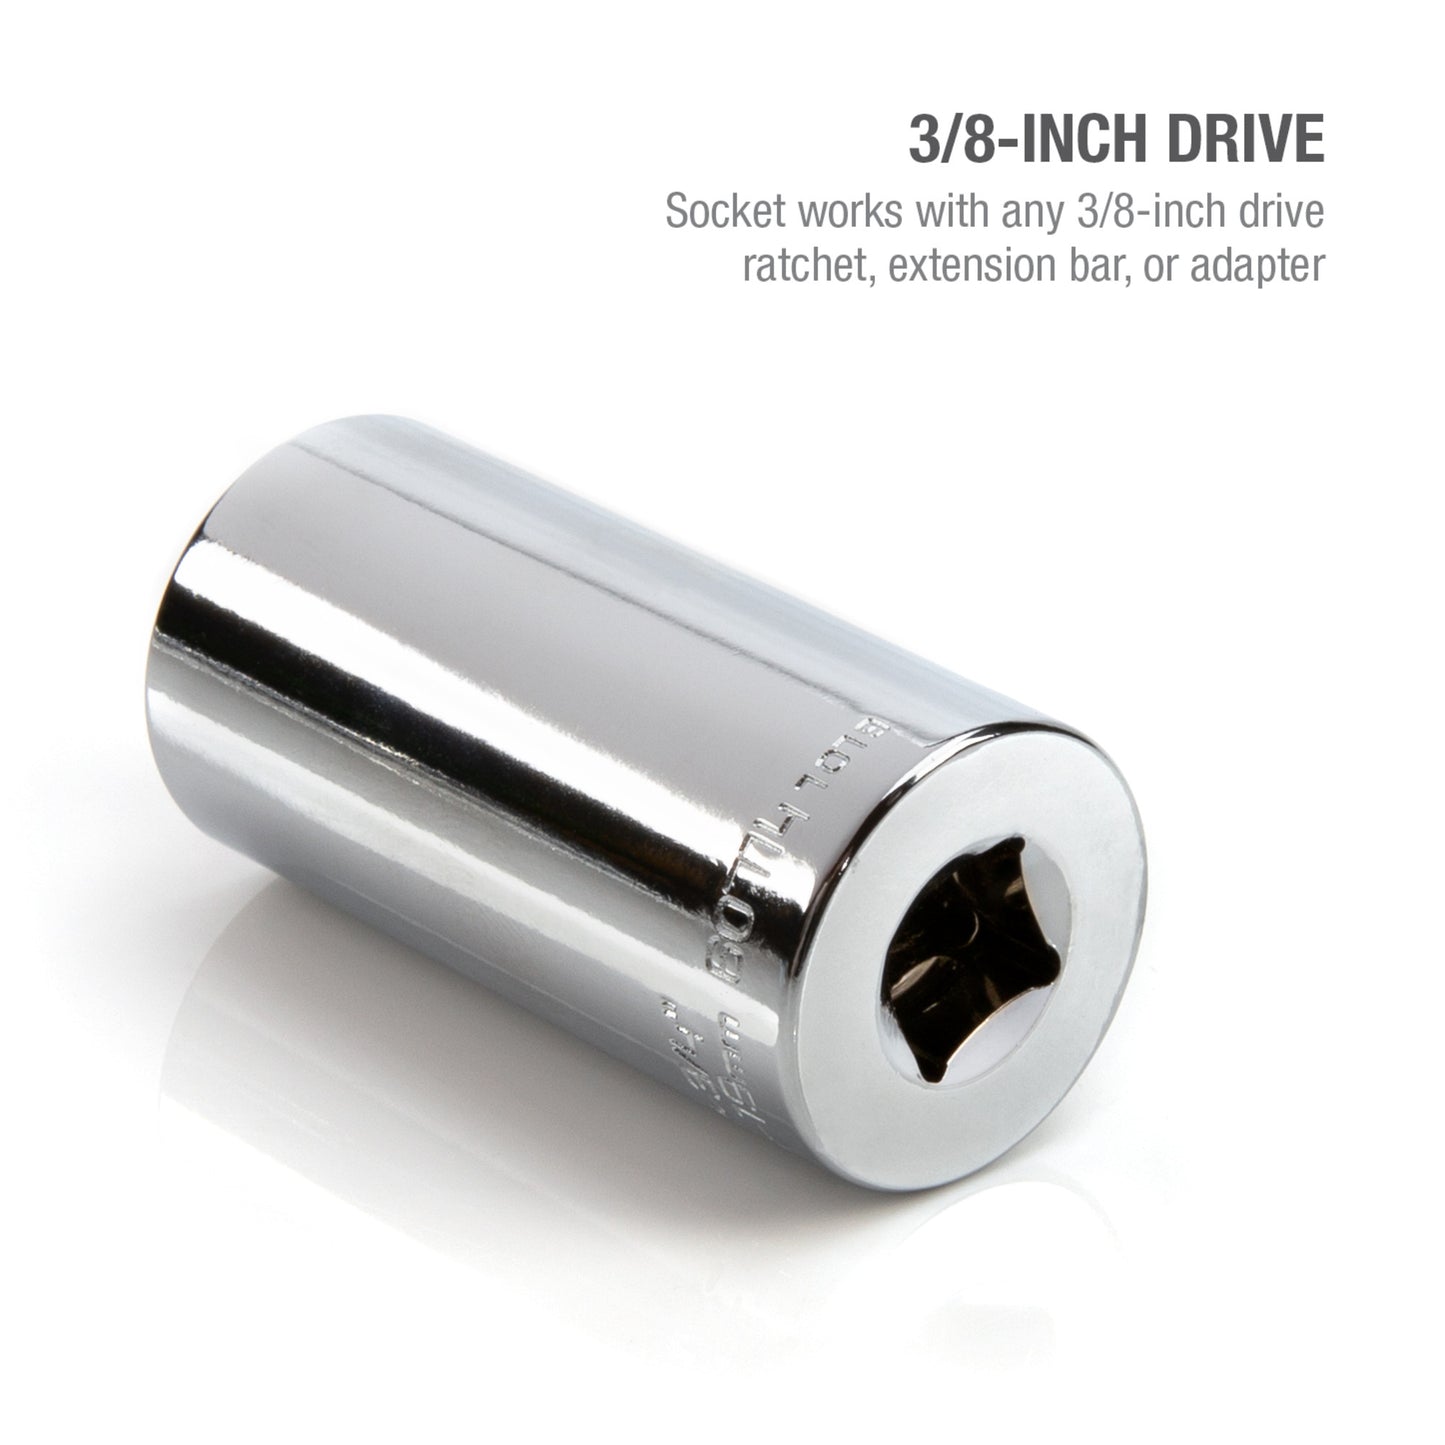 3/8-Inch Drive Universal Pin Socket with Adapter